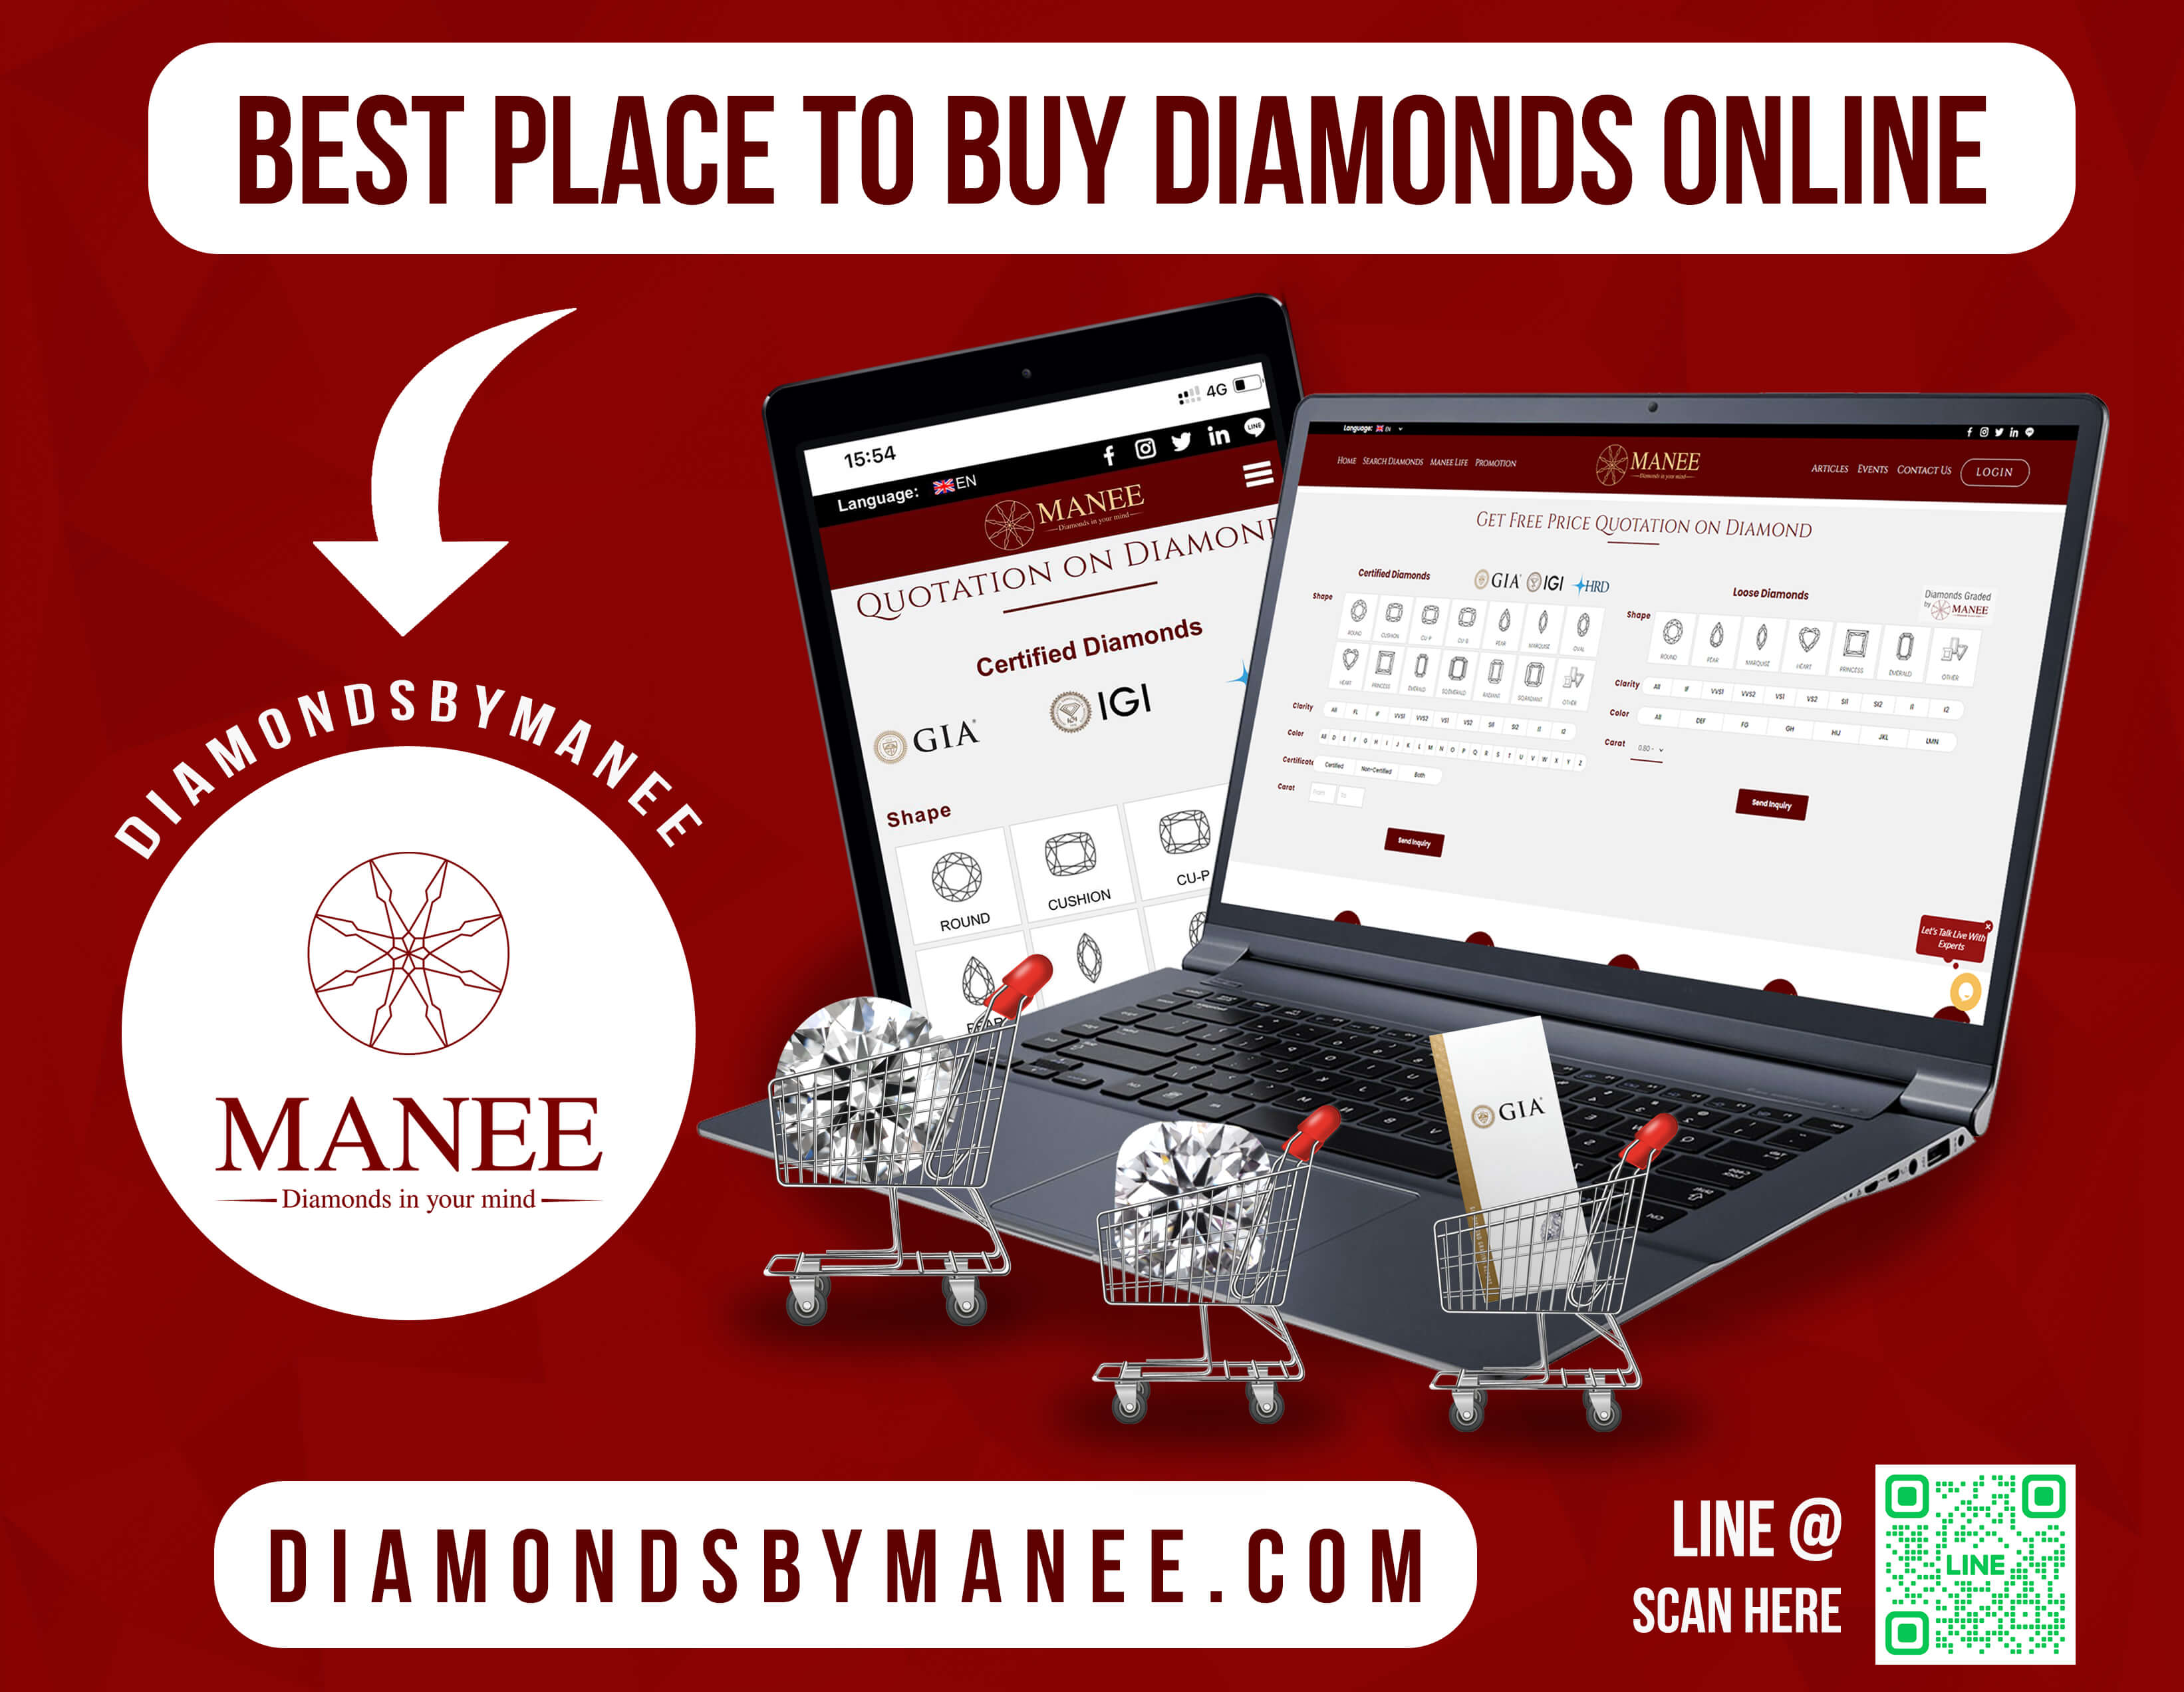 Buy Diamonds Online: How to Select the Right Retailer for You